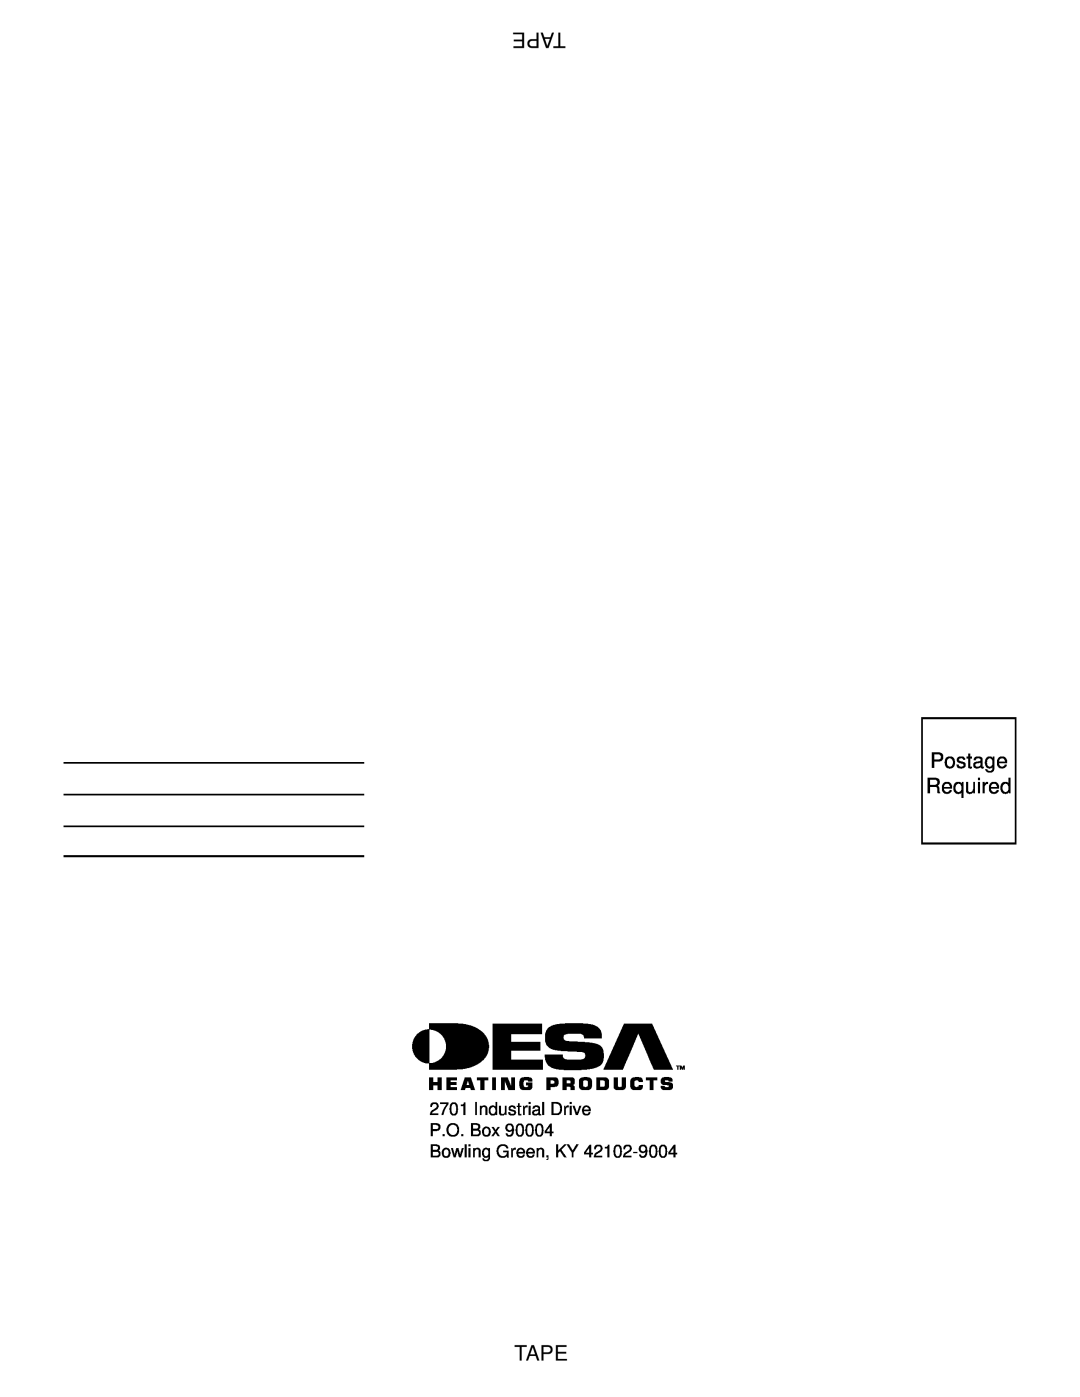 Desa EFS33PRA installation manual Tape, Postage Required, Industrial Drive P.O. Box Bowling Green, KY 